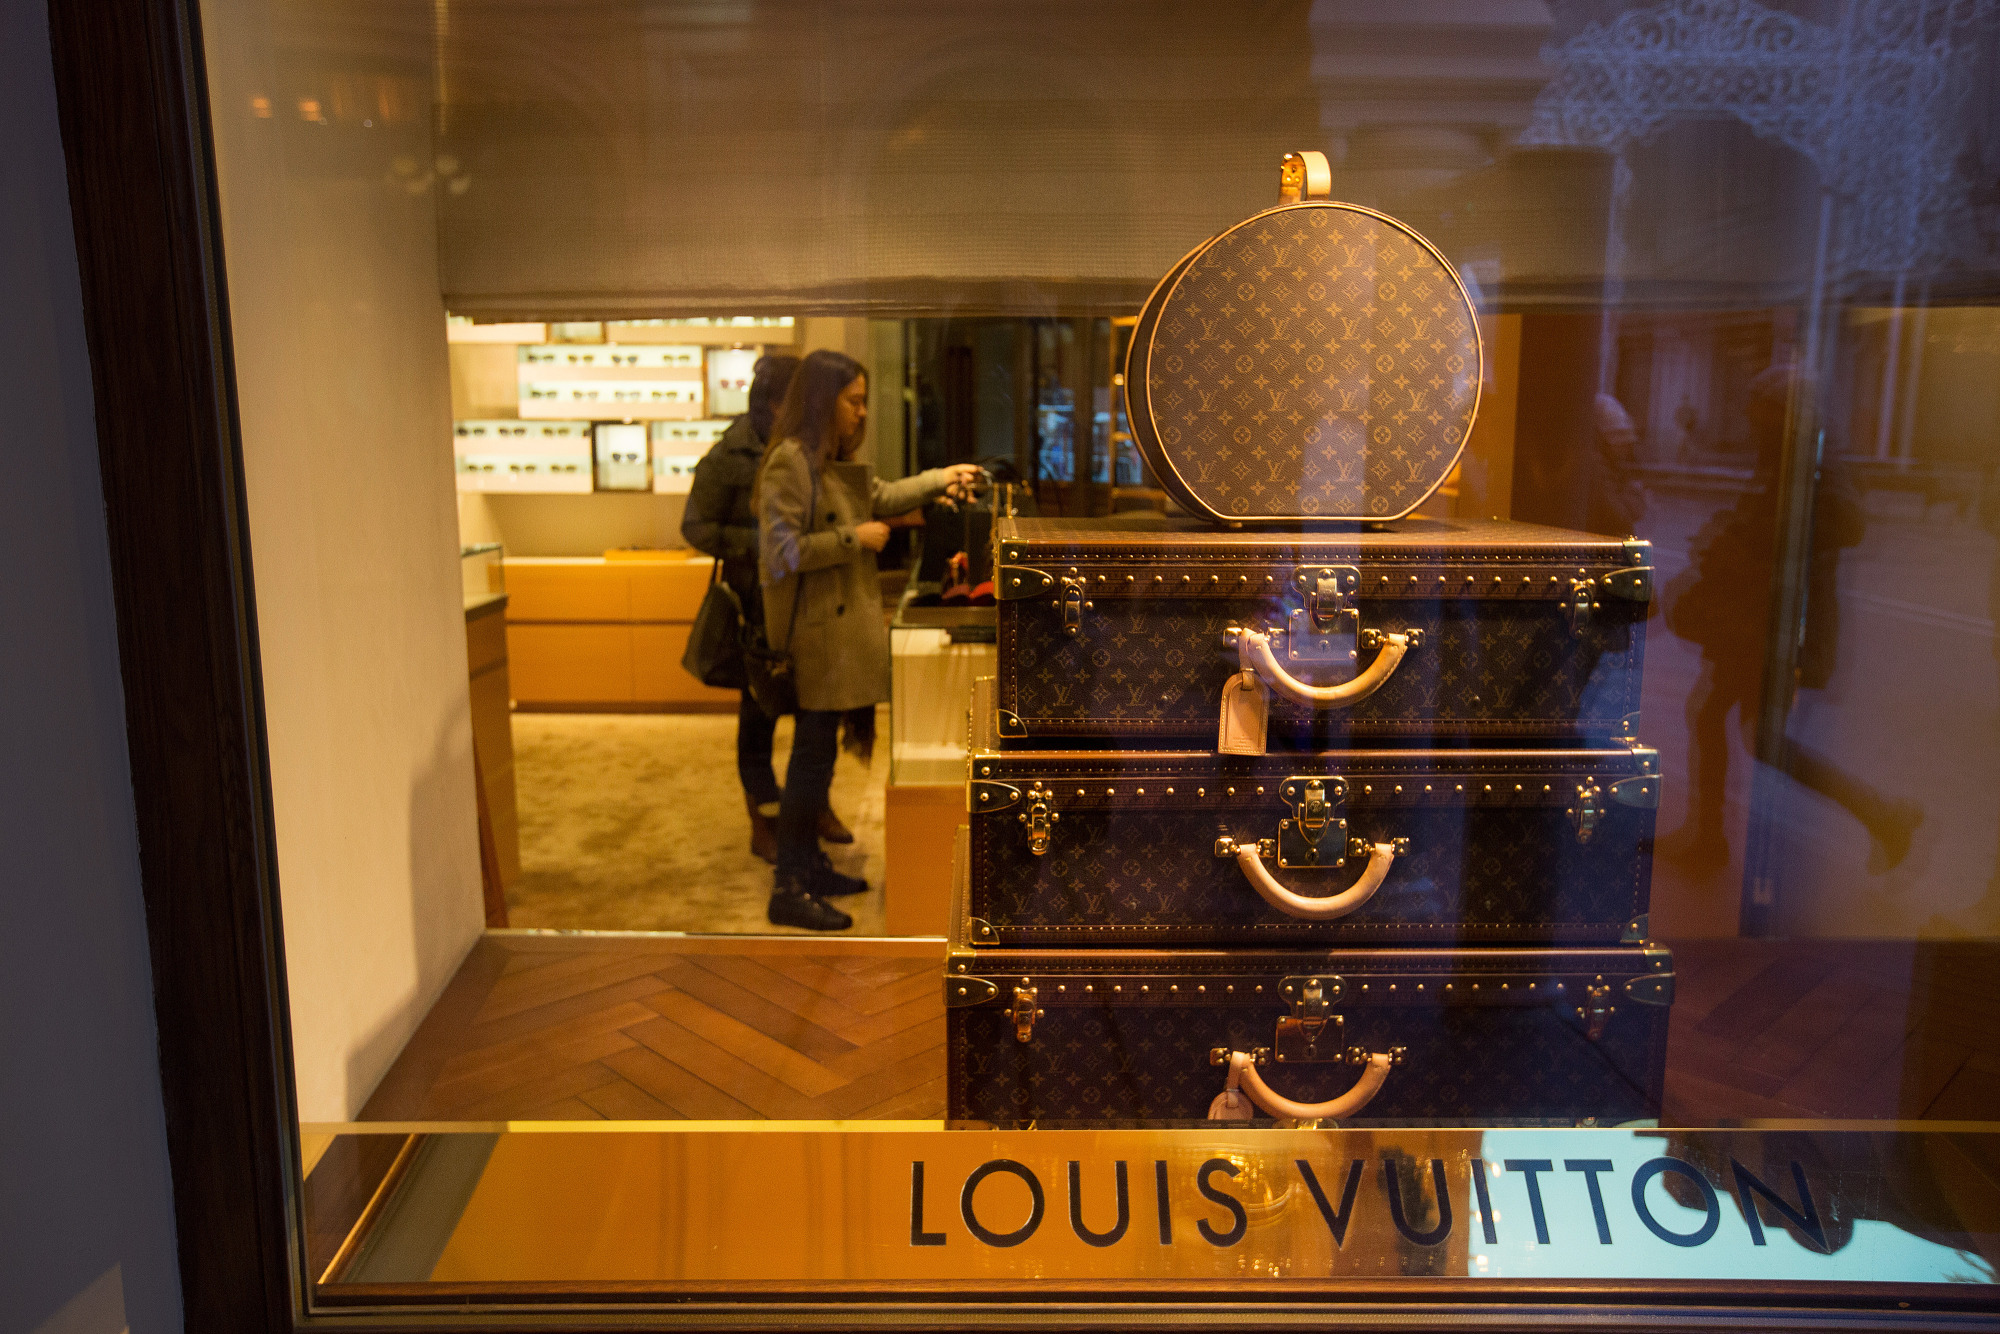 LOUIS VUITTON FACTORY YOU WON'T SEE THIS ANYWHERE! 